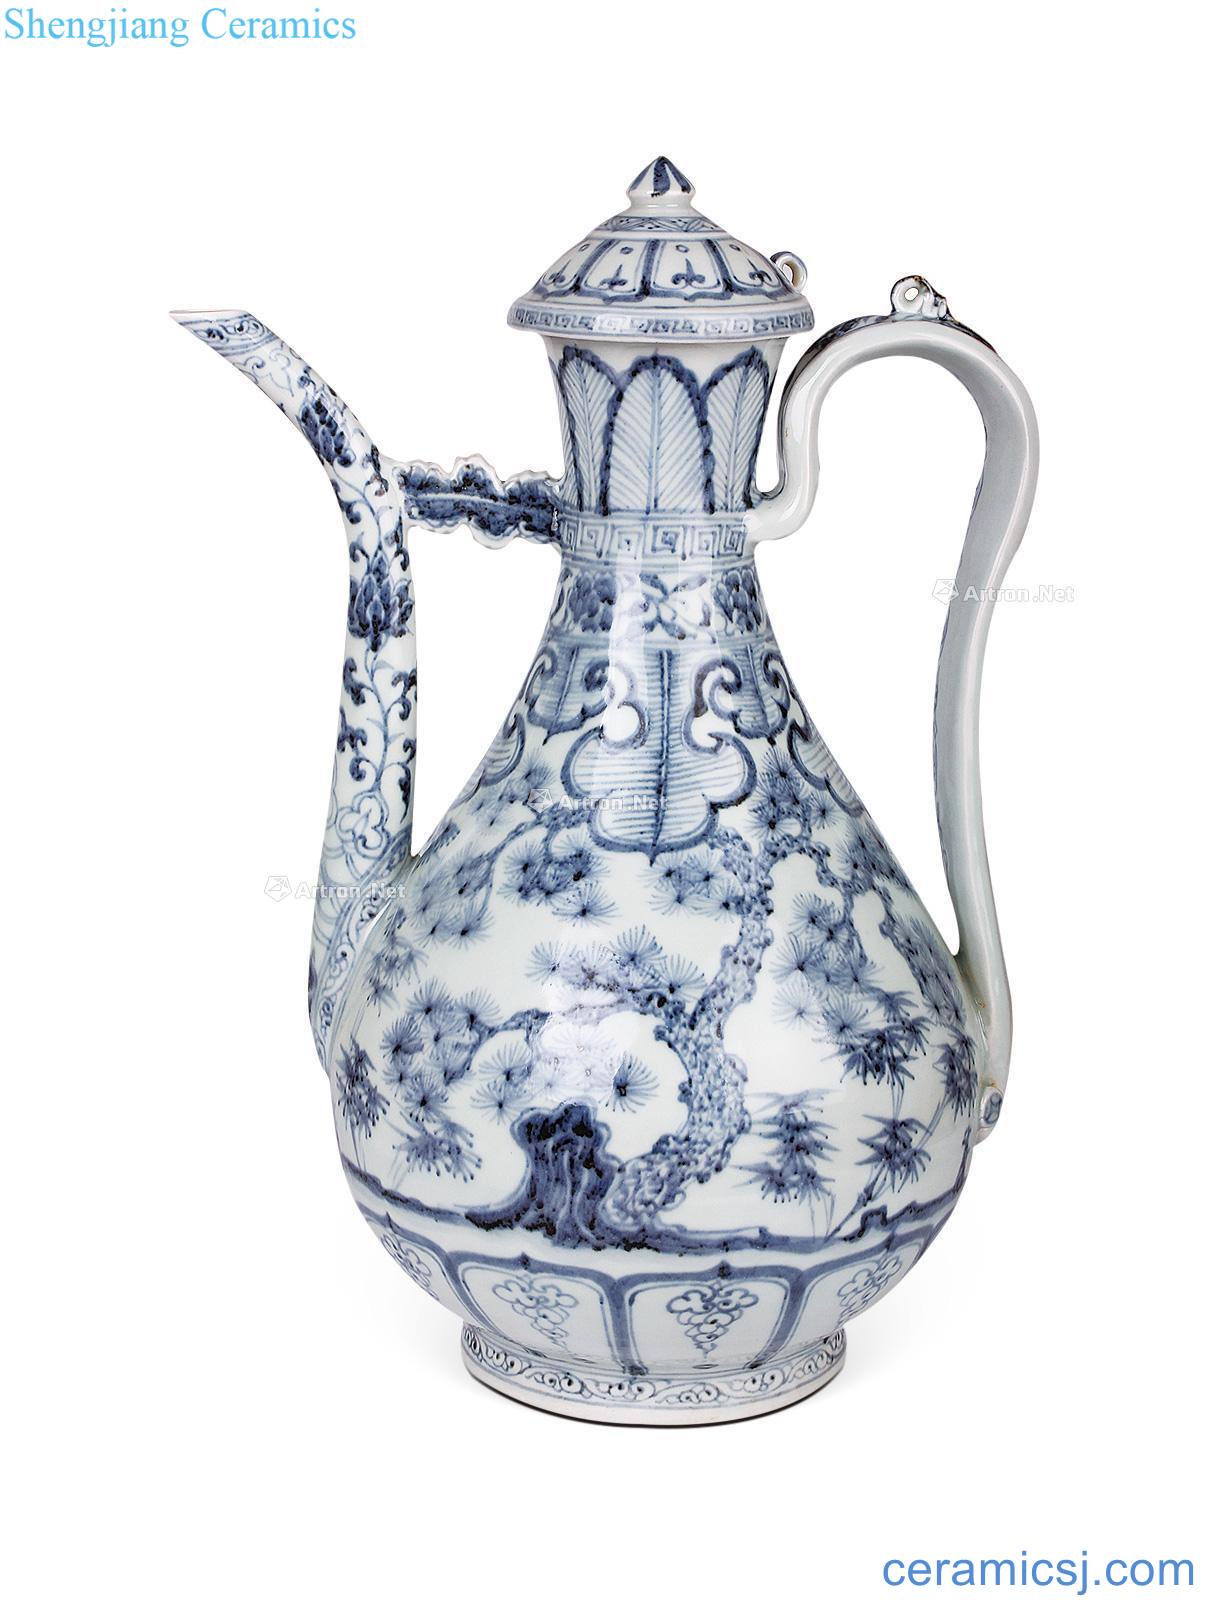 At the end of the yuan Ming Blue and white, poetic ewer